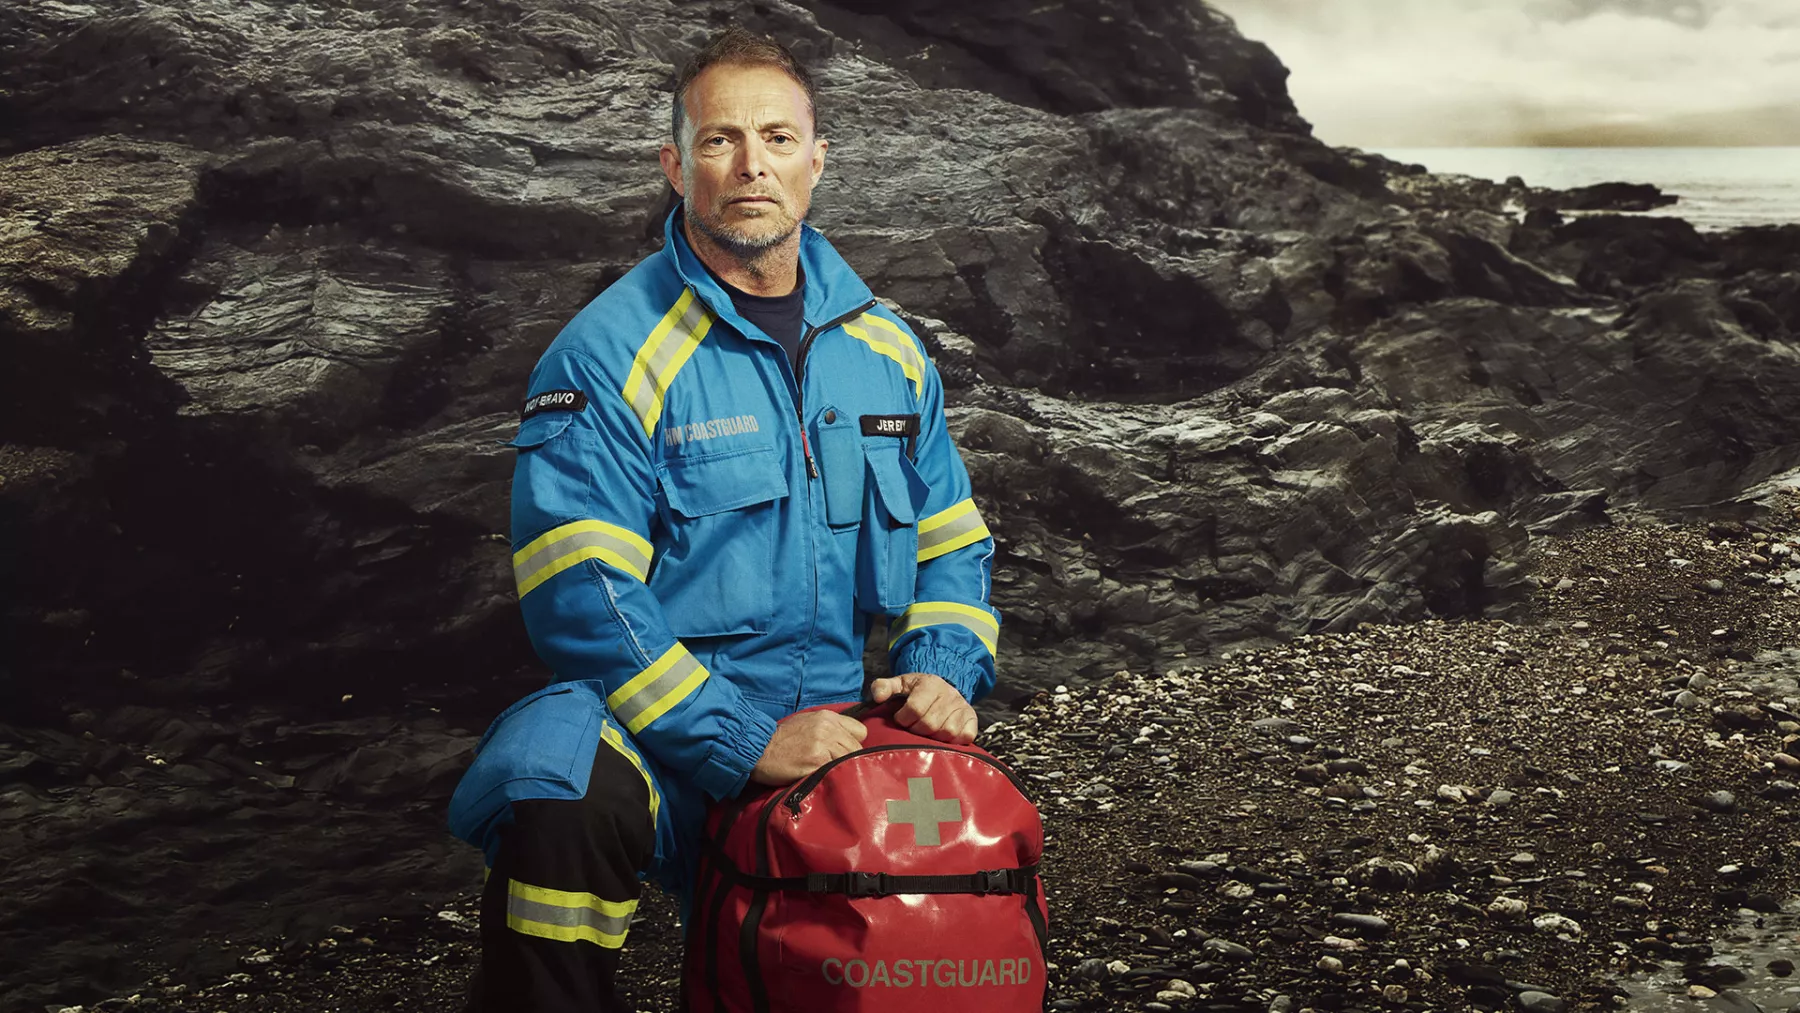 A male Coastguard officer kneels on a grey, rocky landscape. He is wearing his blue and yellow coveralls and has a red first aid kit in his hands.